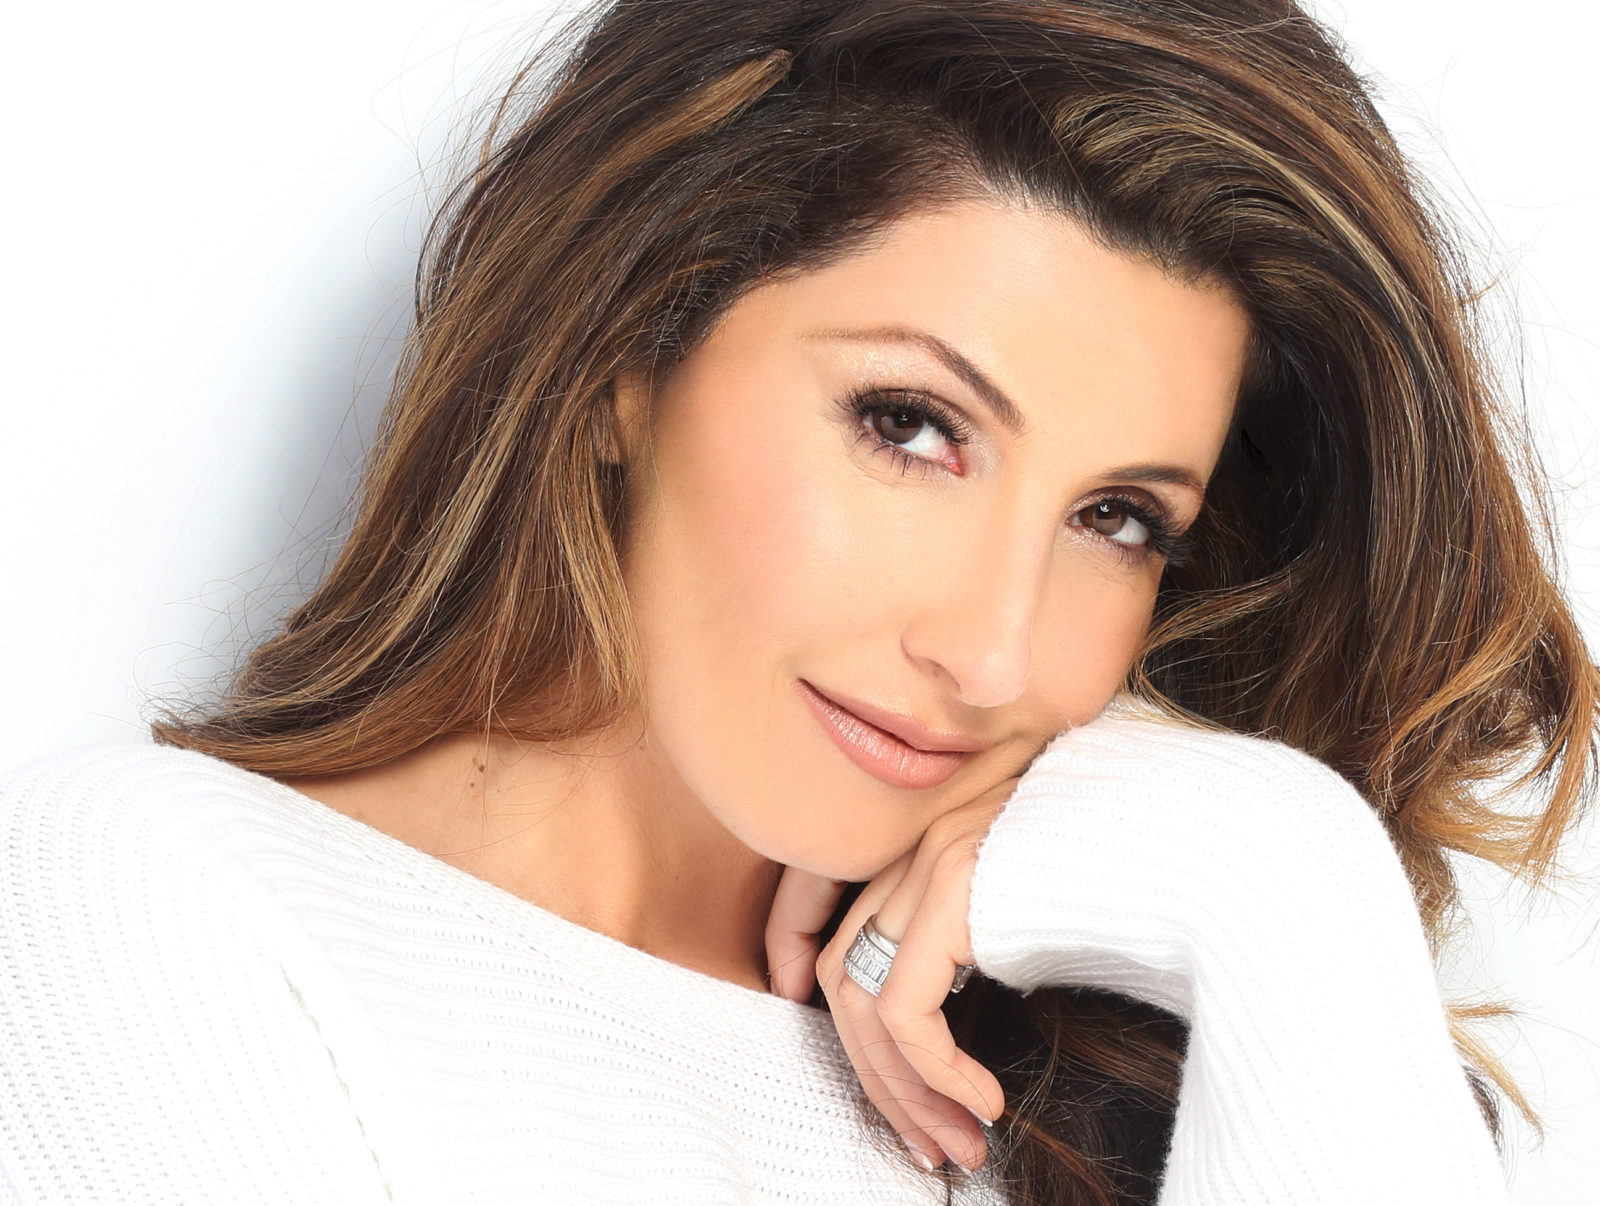 Jaclyn Stapp, mother, beauty queen, philanthropist, fashion model, award-winning author, founder of CHARM (Children Are Magical), interviewed with The Nashville Edit